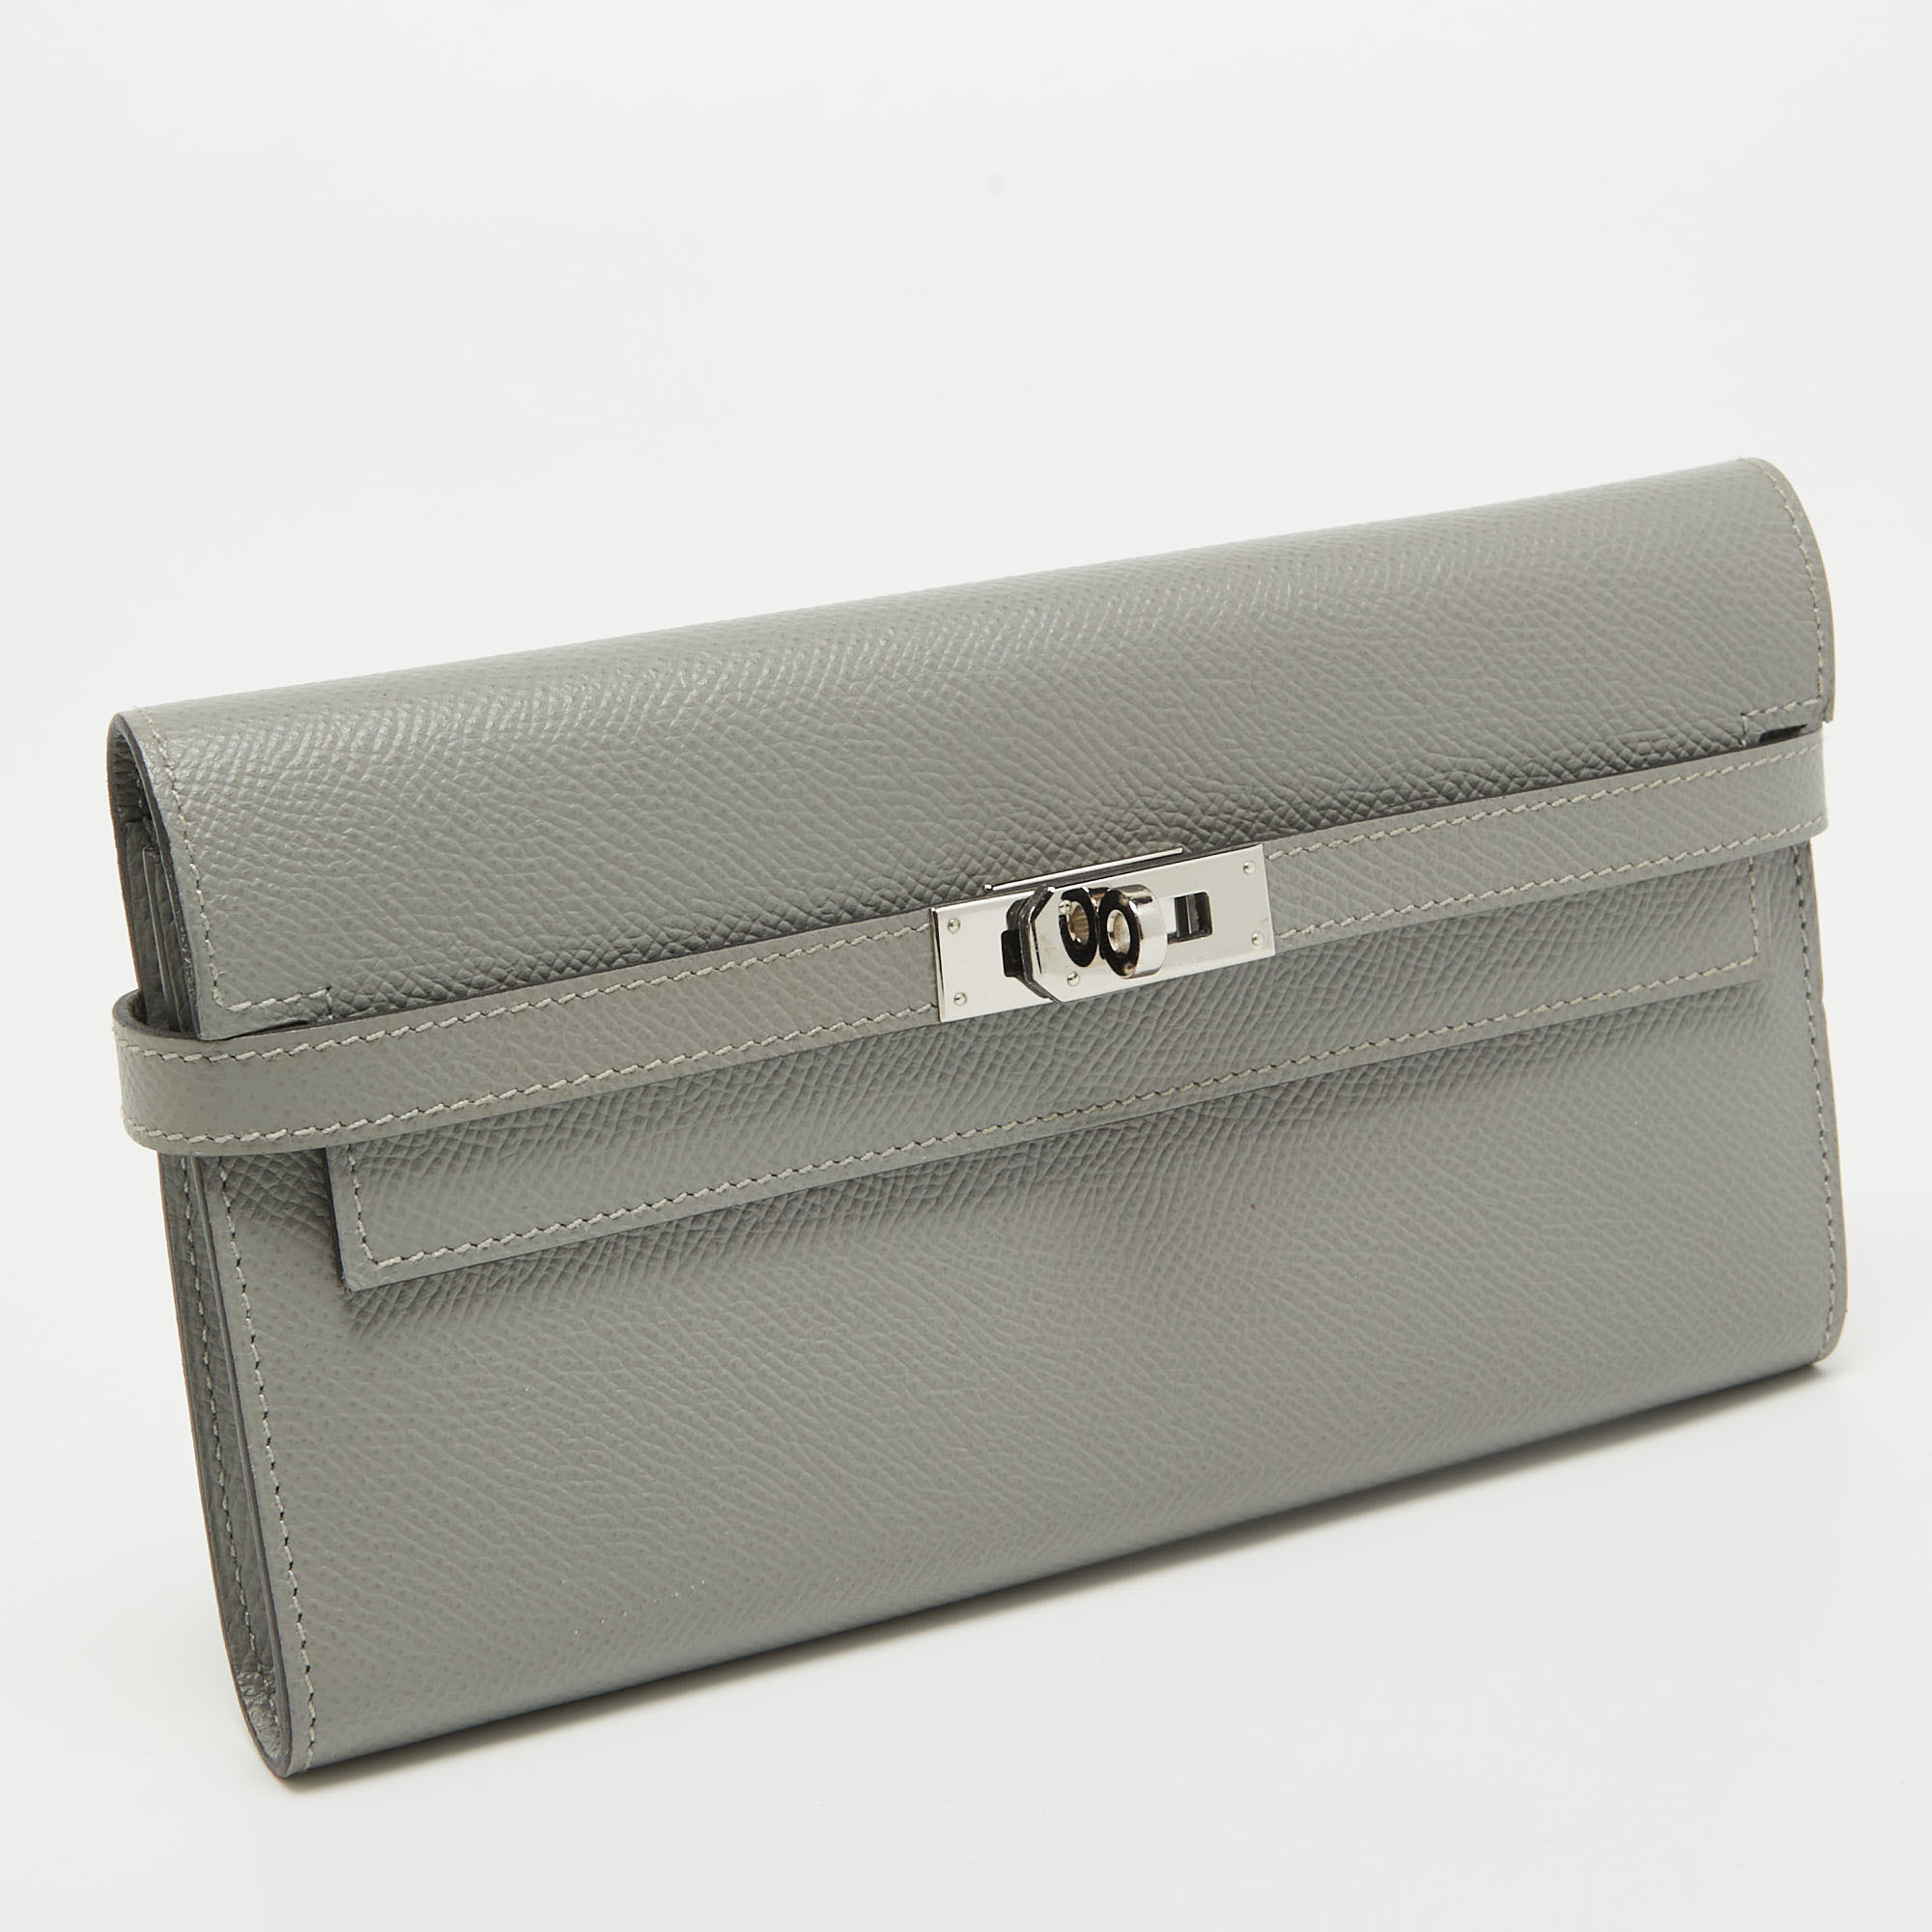 Hermes Gris Mouette Epsom Leather Kelly Classic Wallet